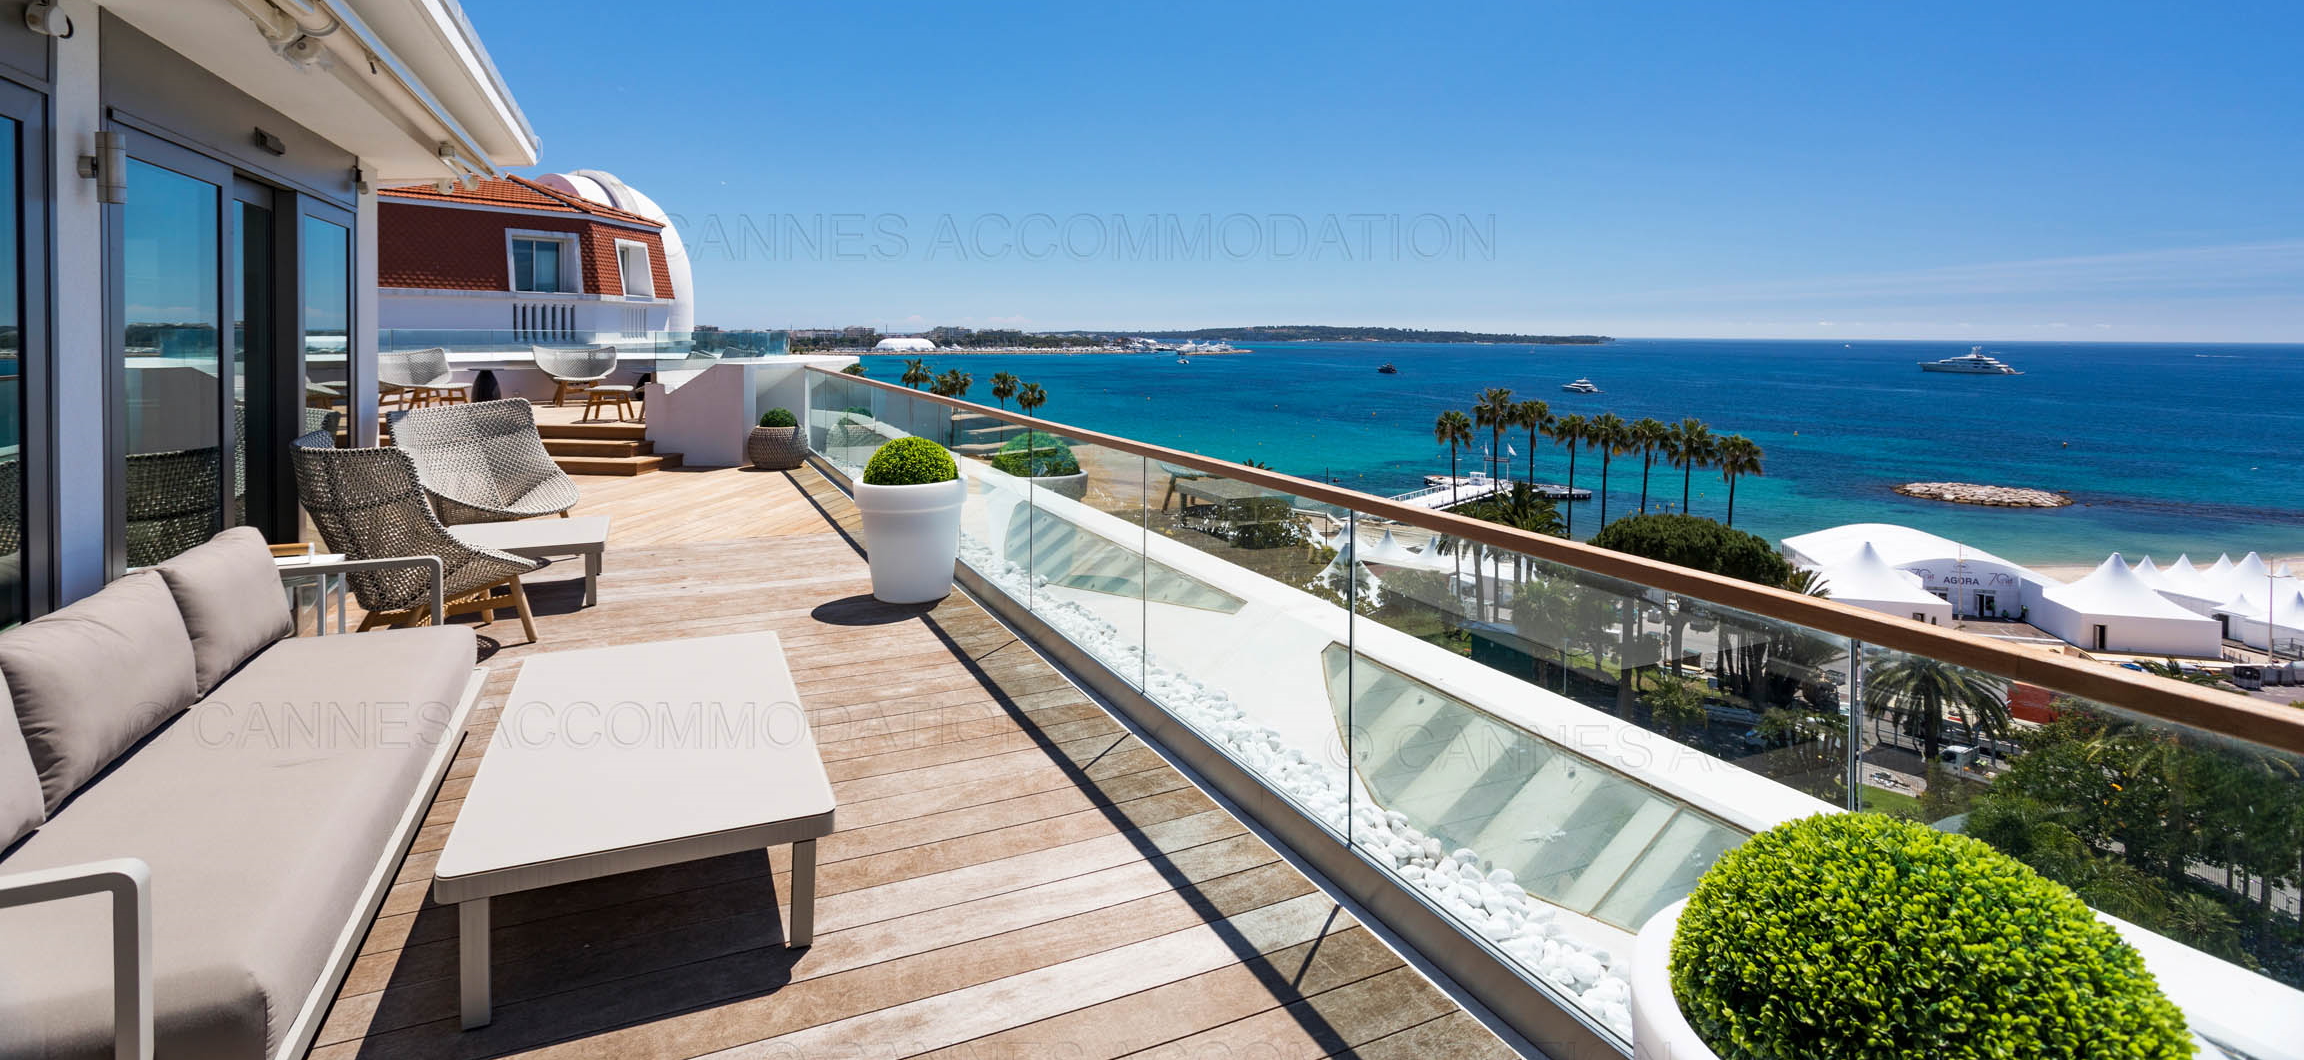 Cannes Accommodations 7 advantages for you of renting a Cannes apartment